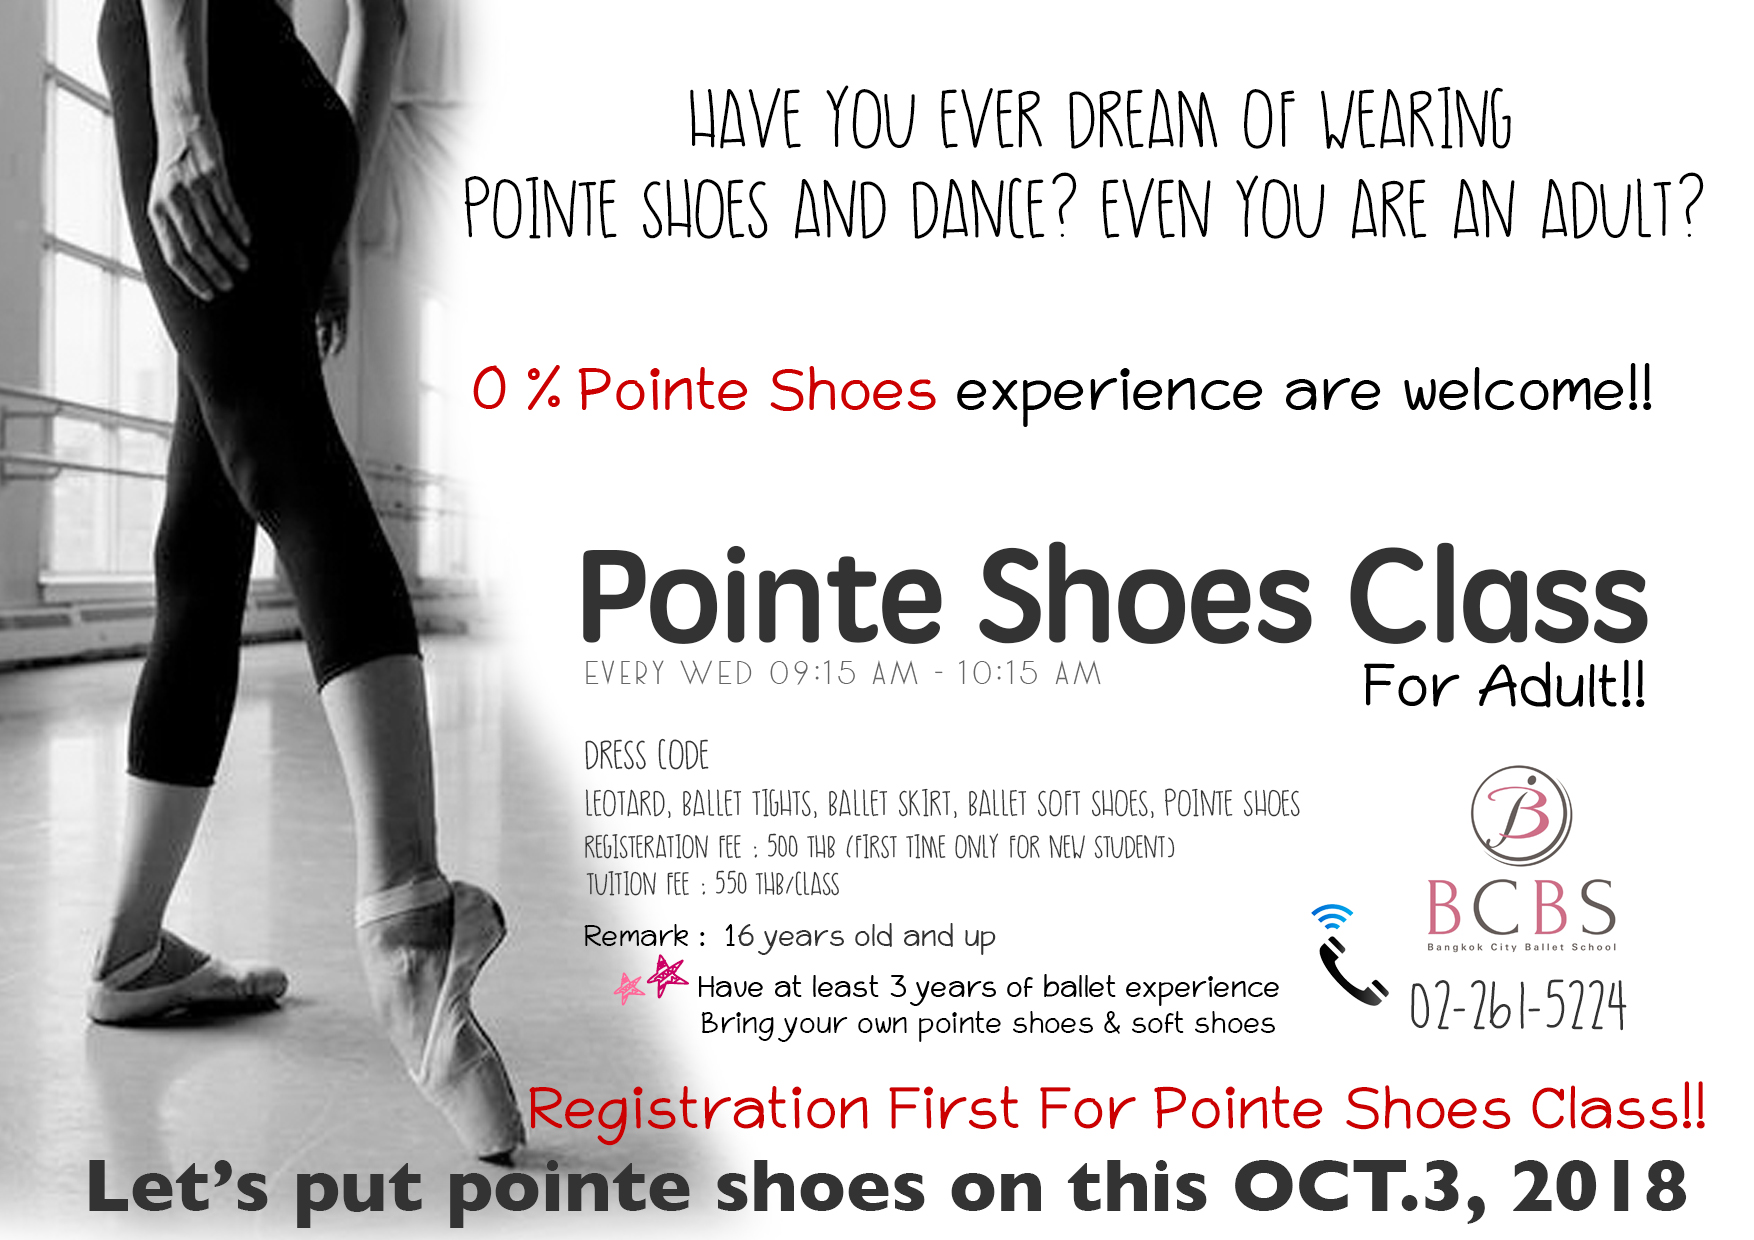 New Class!!! Pointe Shoes Class for Adult